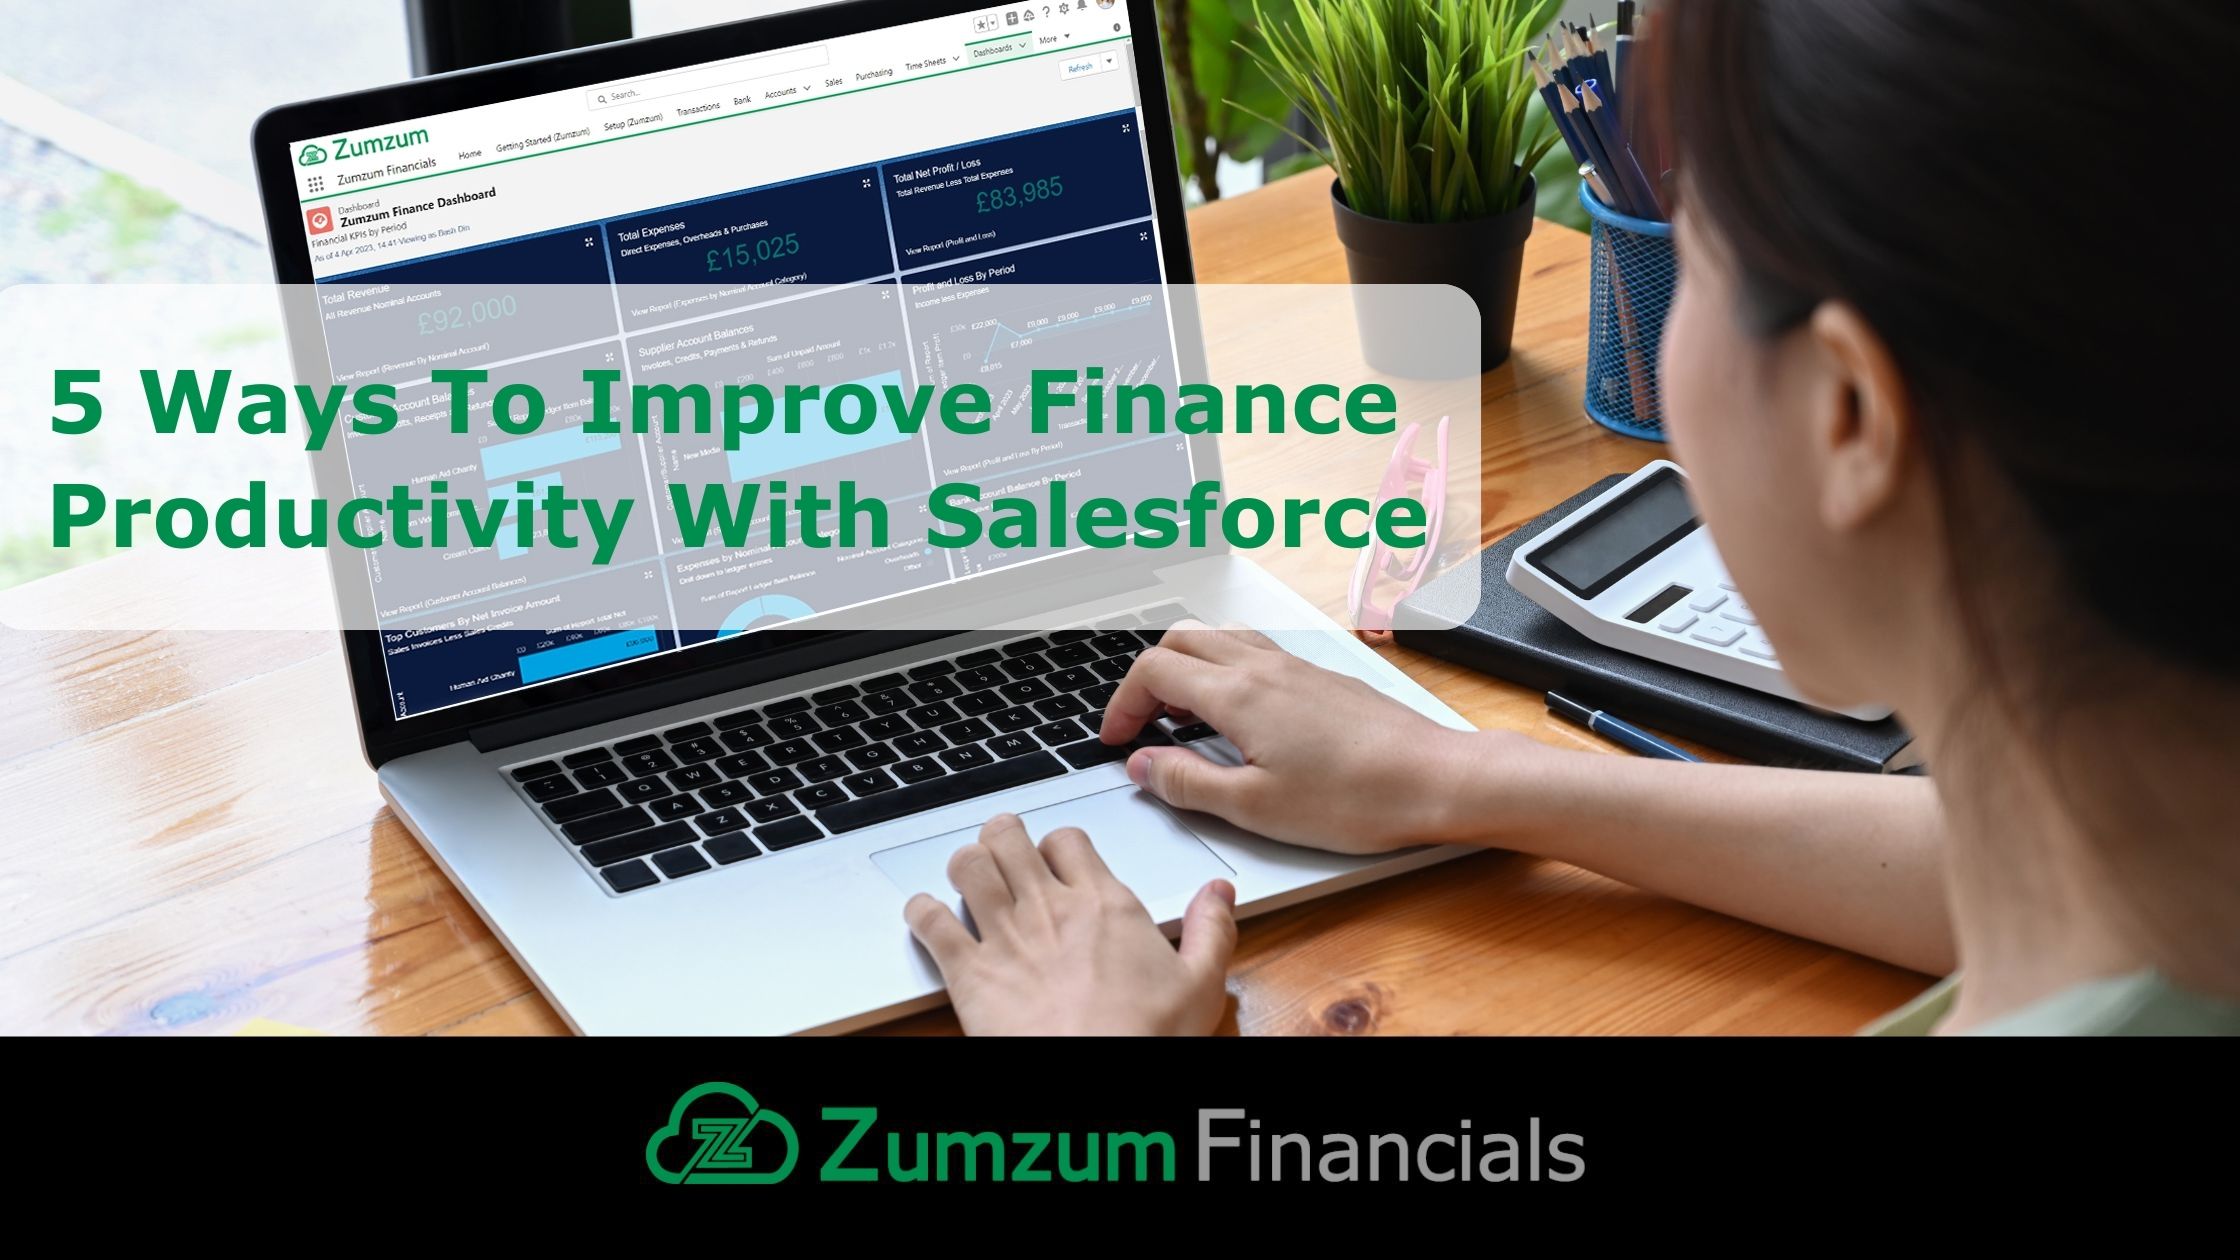 5 Ways To Improve Finance Productivity With Salesforce